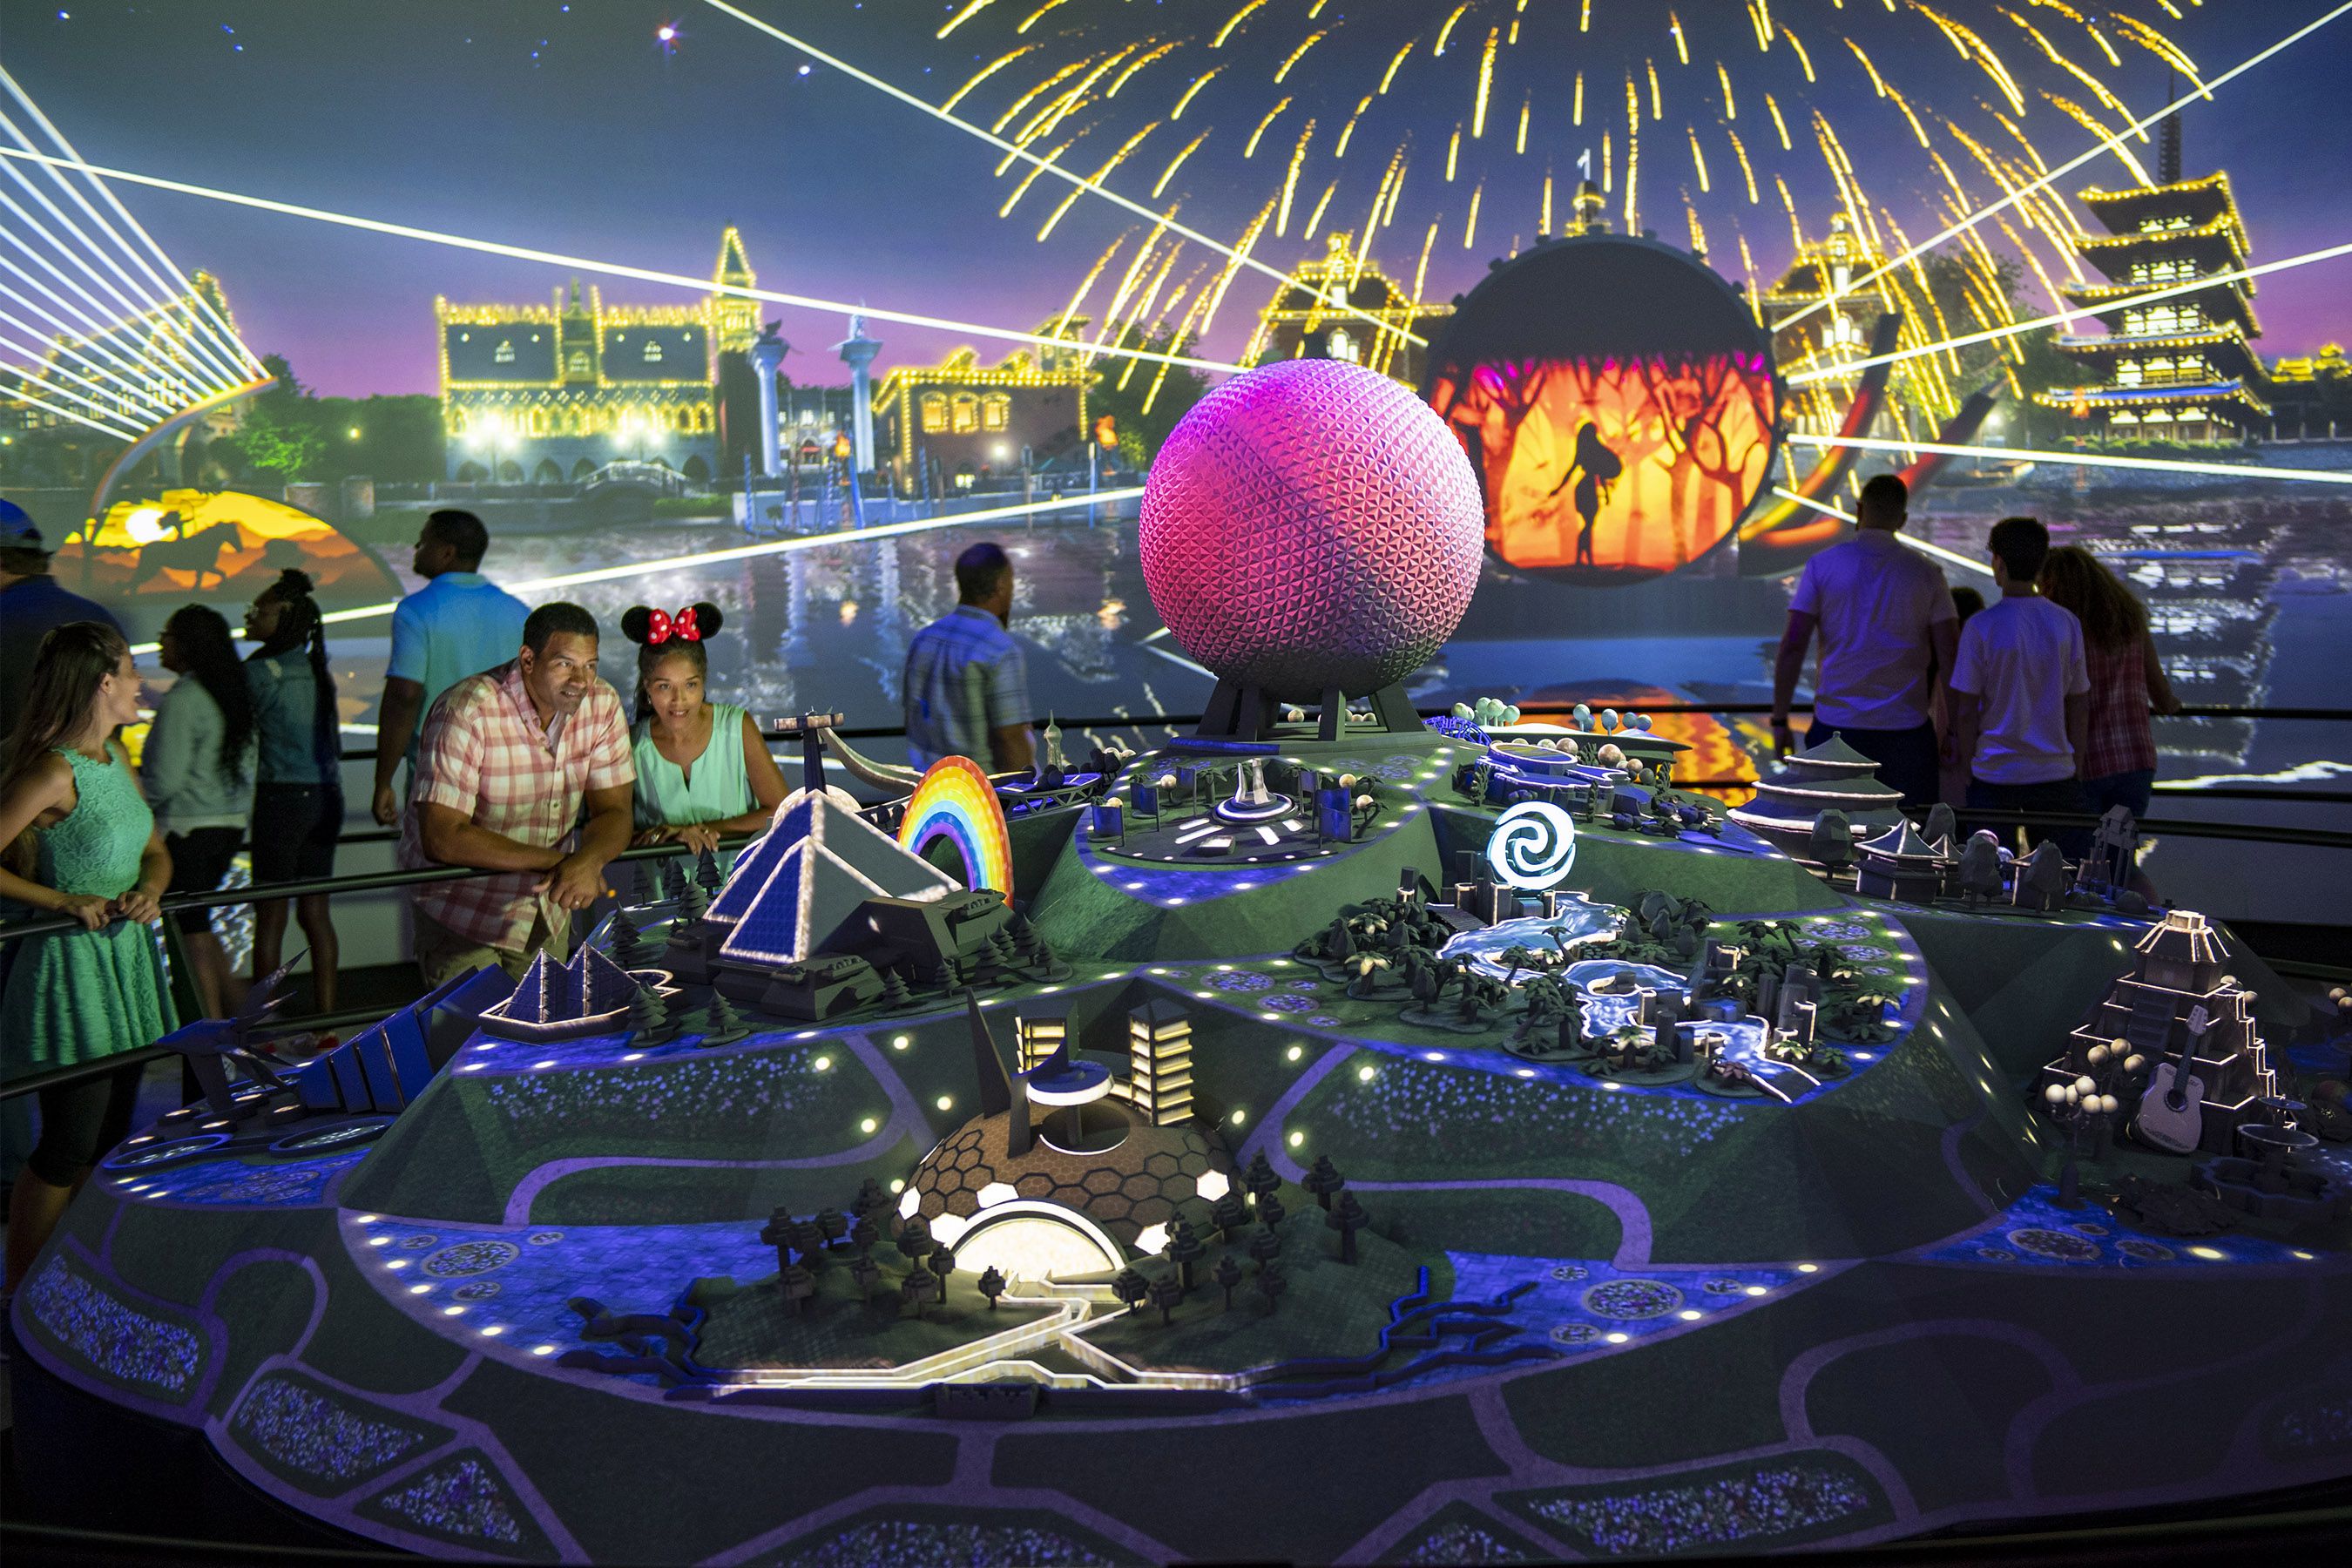 Epcot's makeover: Here's the latest on new attractions